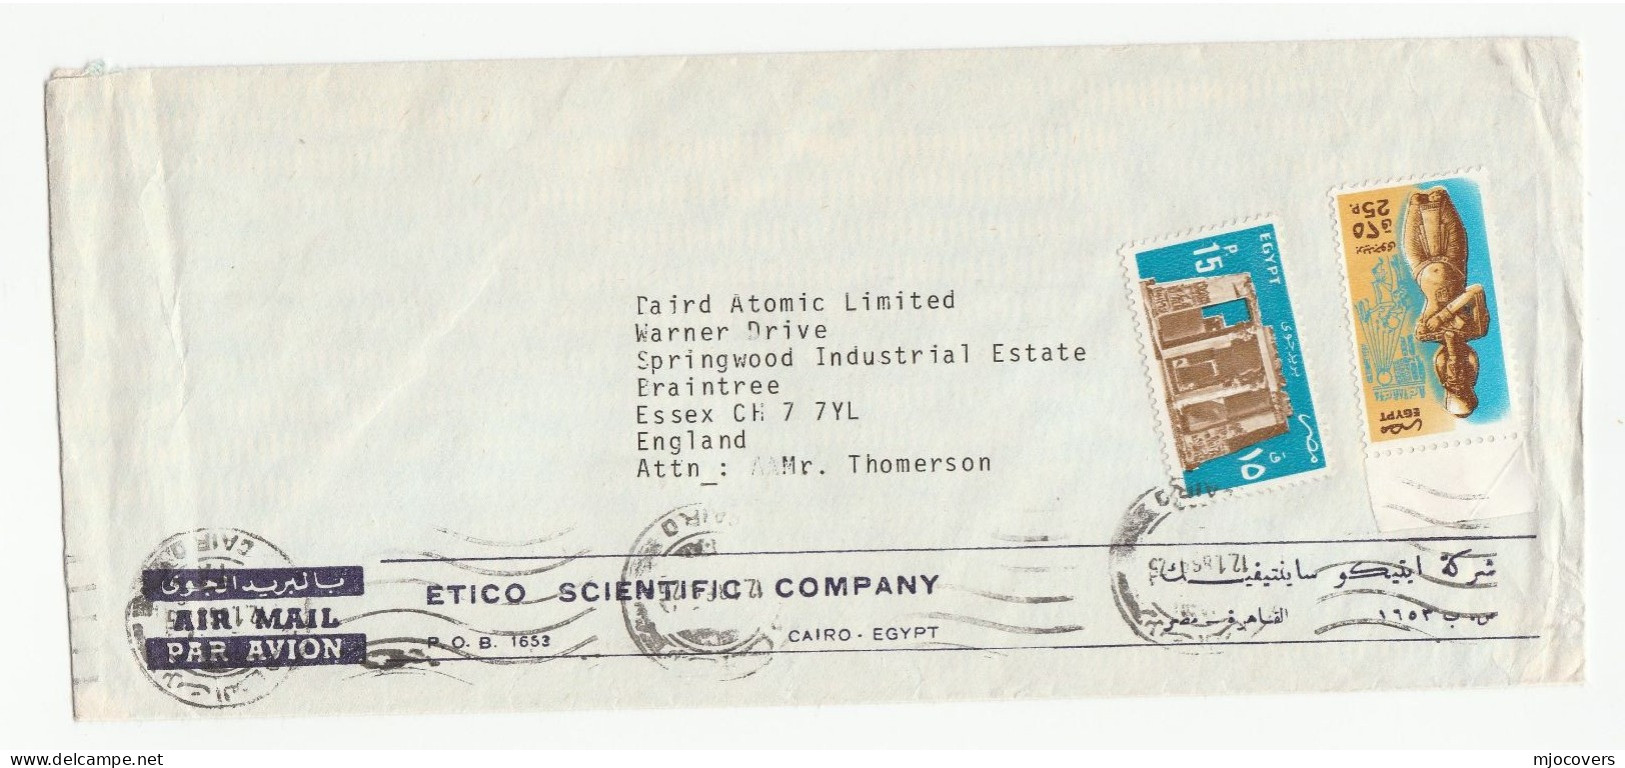 ATOMIC - EGYPT Covers UNION CARBIDE & ETICO SCIENTIFIC To Baird ATOMIC Germany Nuclear Energy Stamps Cover - Atomo